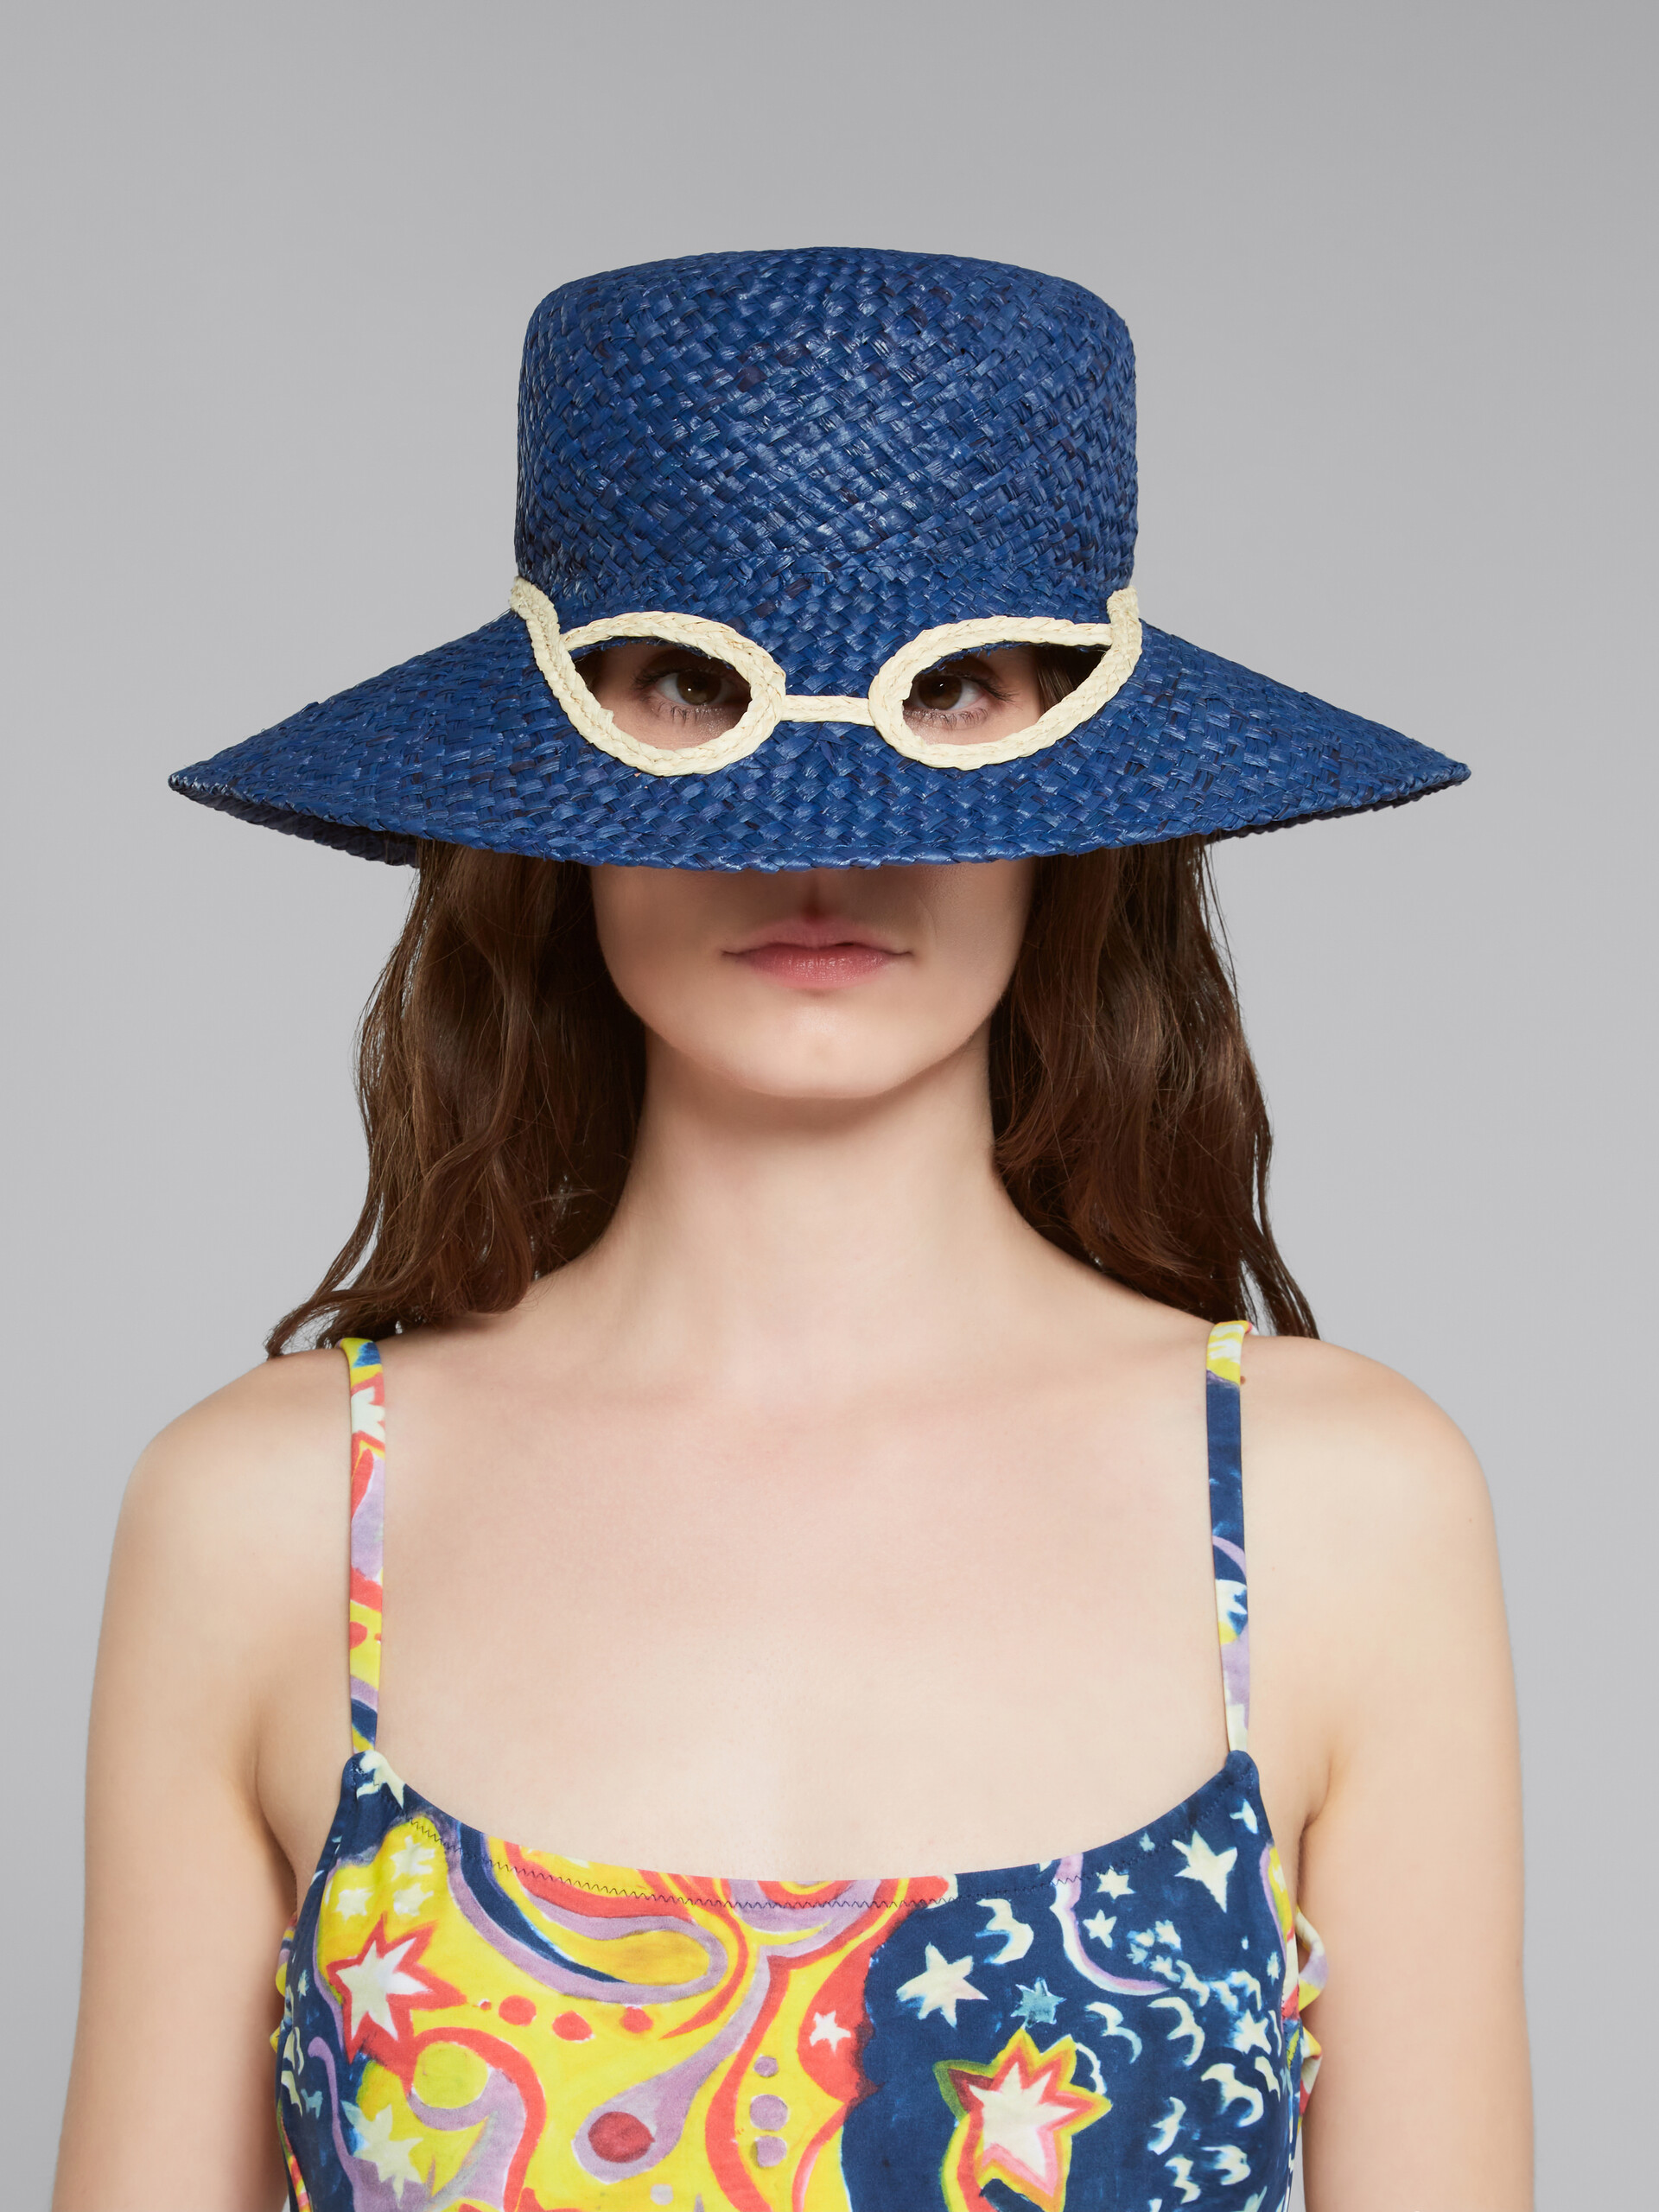 Marni x No Vacancy Inn - Blue hat in raffia with cut-outs - Hats - Image 2